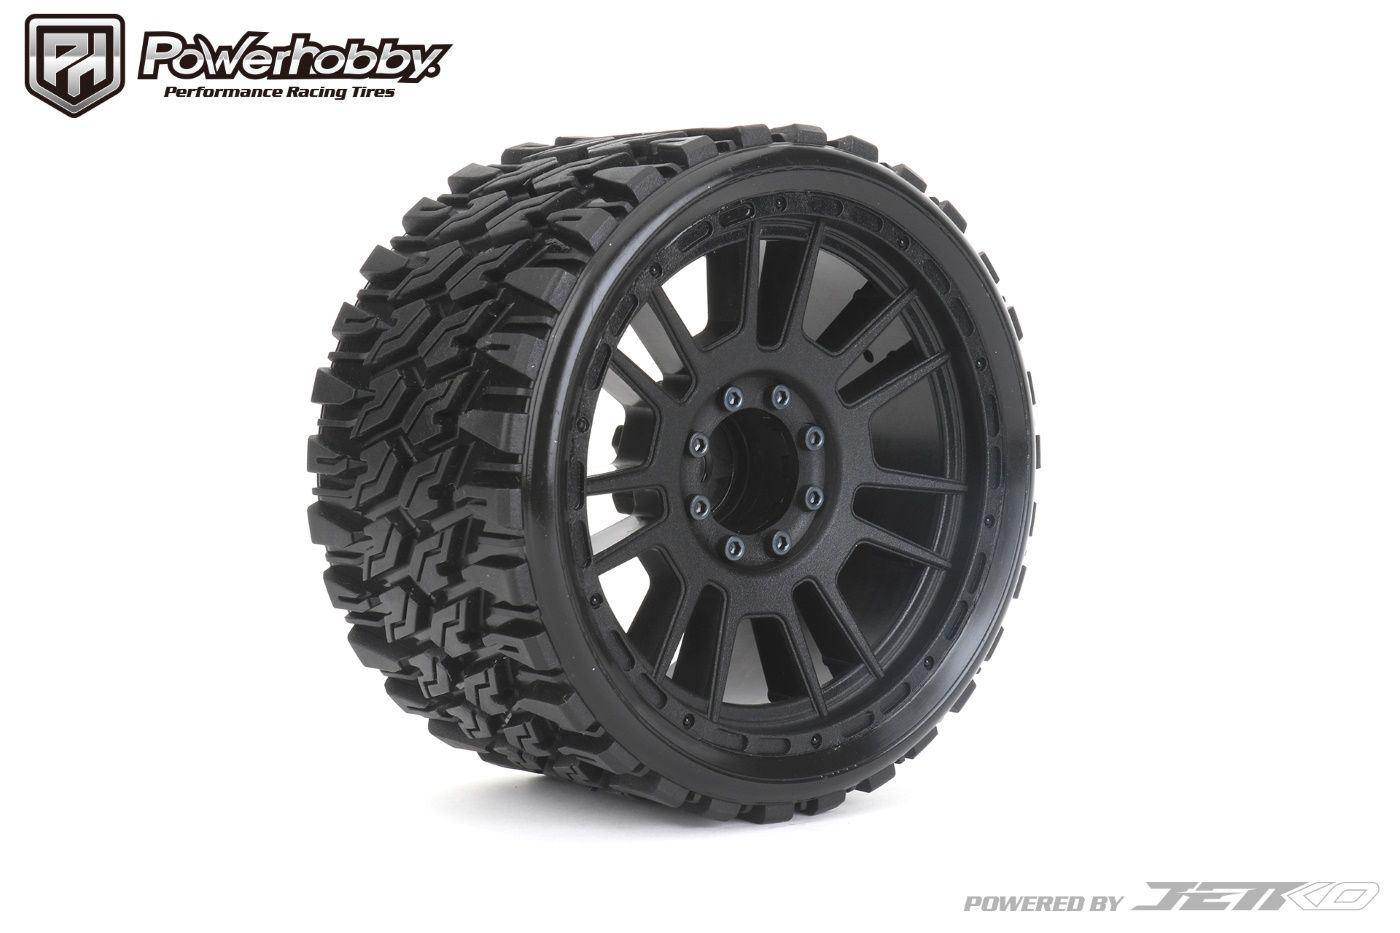 Powerhobby 1/8 MT 4.0 Prophet Belted Mounted Tires w Removable Hex Wheels (2) - PowerHobby